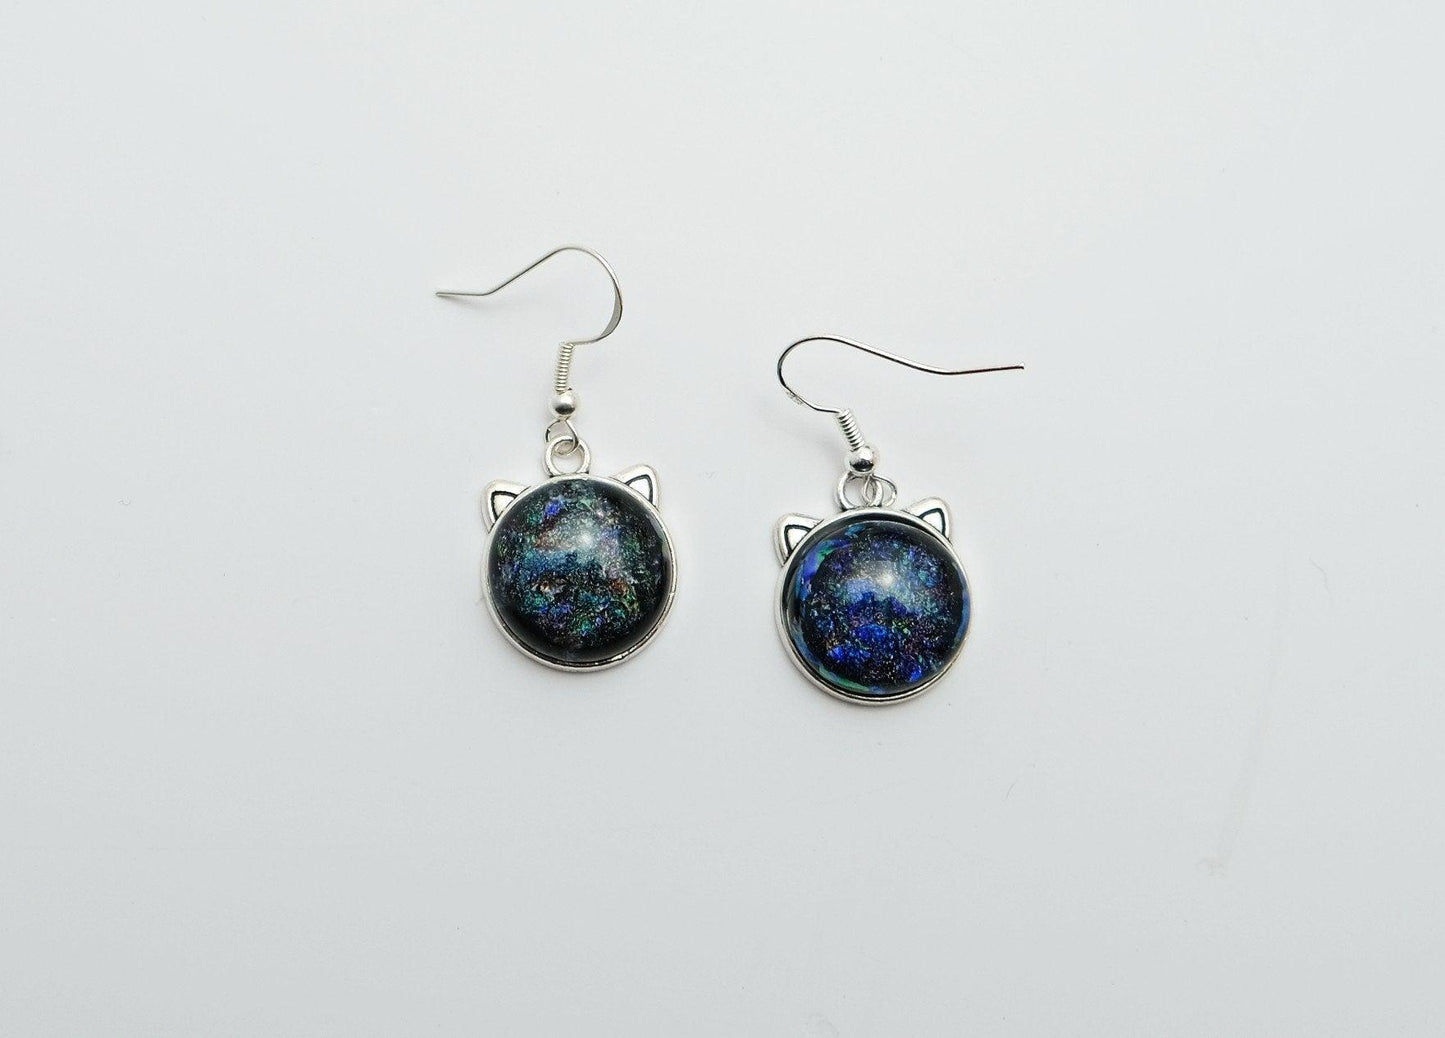 Whimsical Cat Head Shaped pierced Earrings - Silver Tone with blue Dichroic Glass seedsglassworks seeds glassworks